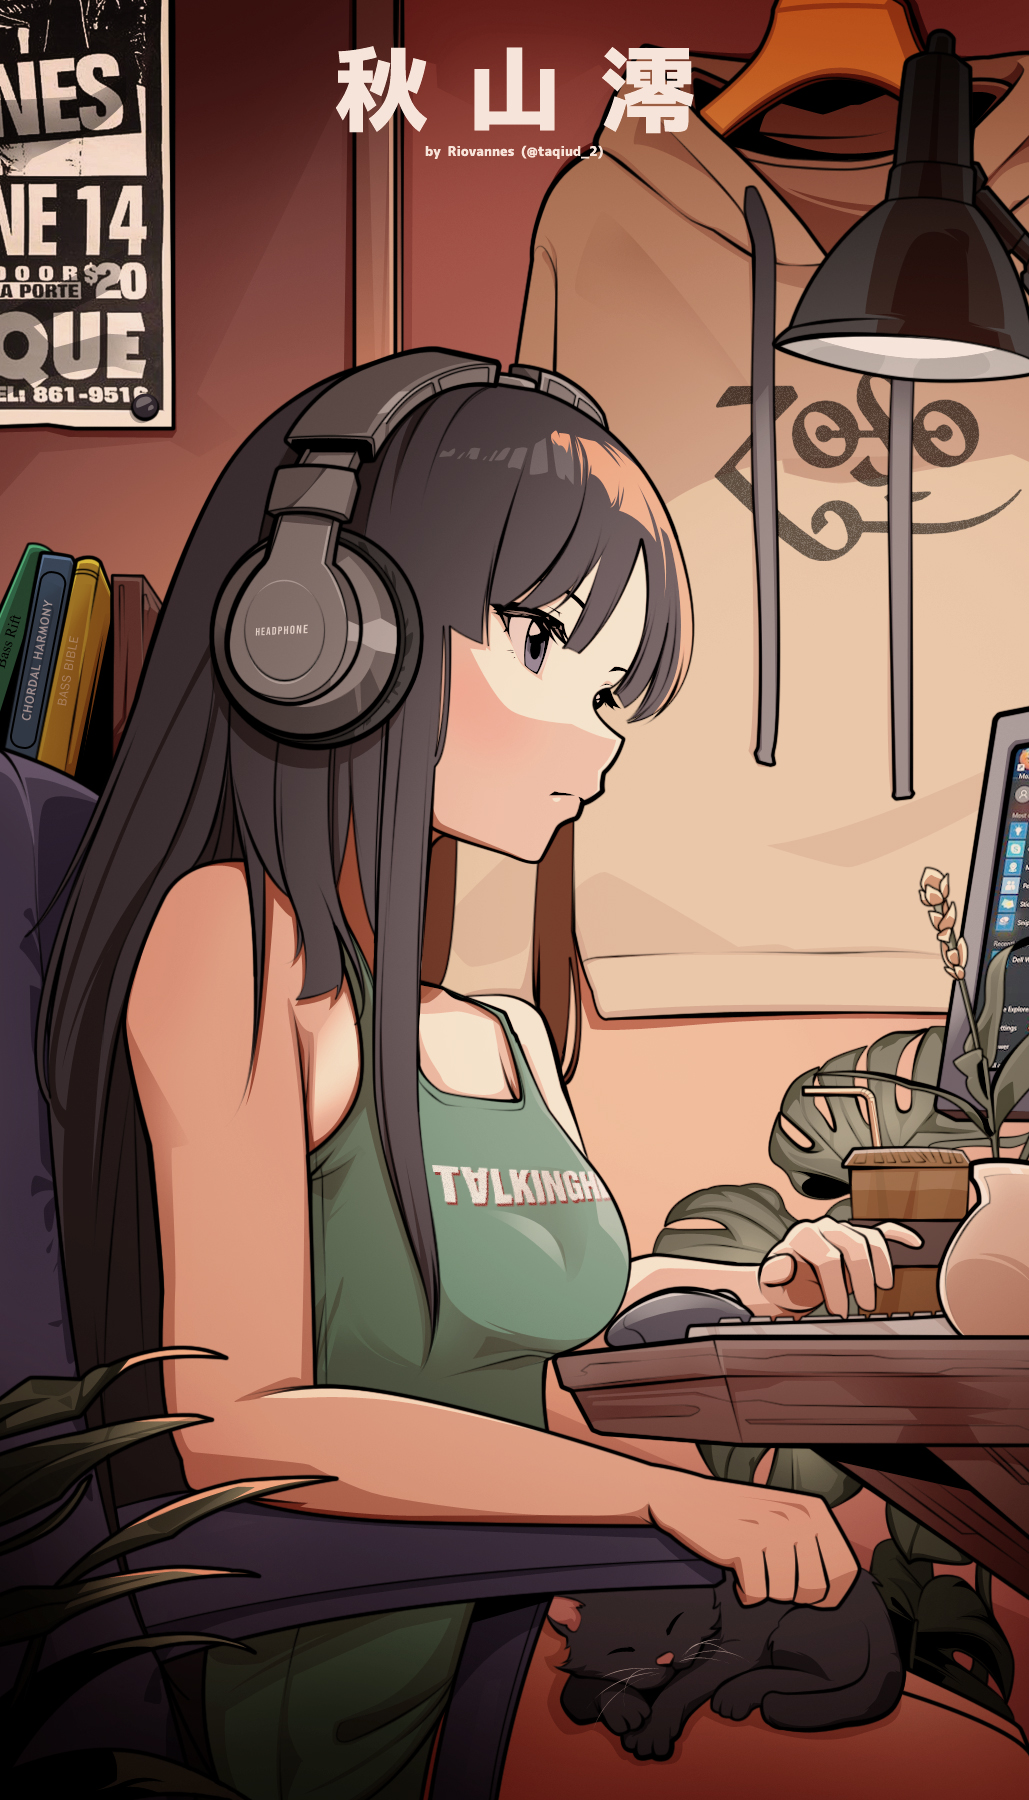 Anime 1029x1800 Akiyama Mio anime girls anime LoFi animals chair watermarked closed mouth black hair long hair relaxing thighs together tank top bookshelves books digital art looking away headphones drink cup plants lamp brown hoodie computer mice keyboards wooden furniture poster side view office chair potted plant black cats Windows 10 computer screen computer shaved armpit women indoors shadow green clothing white text outline